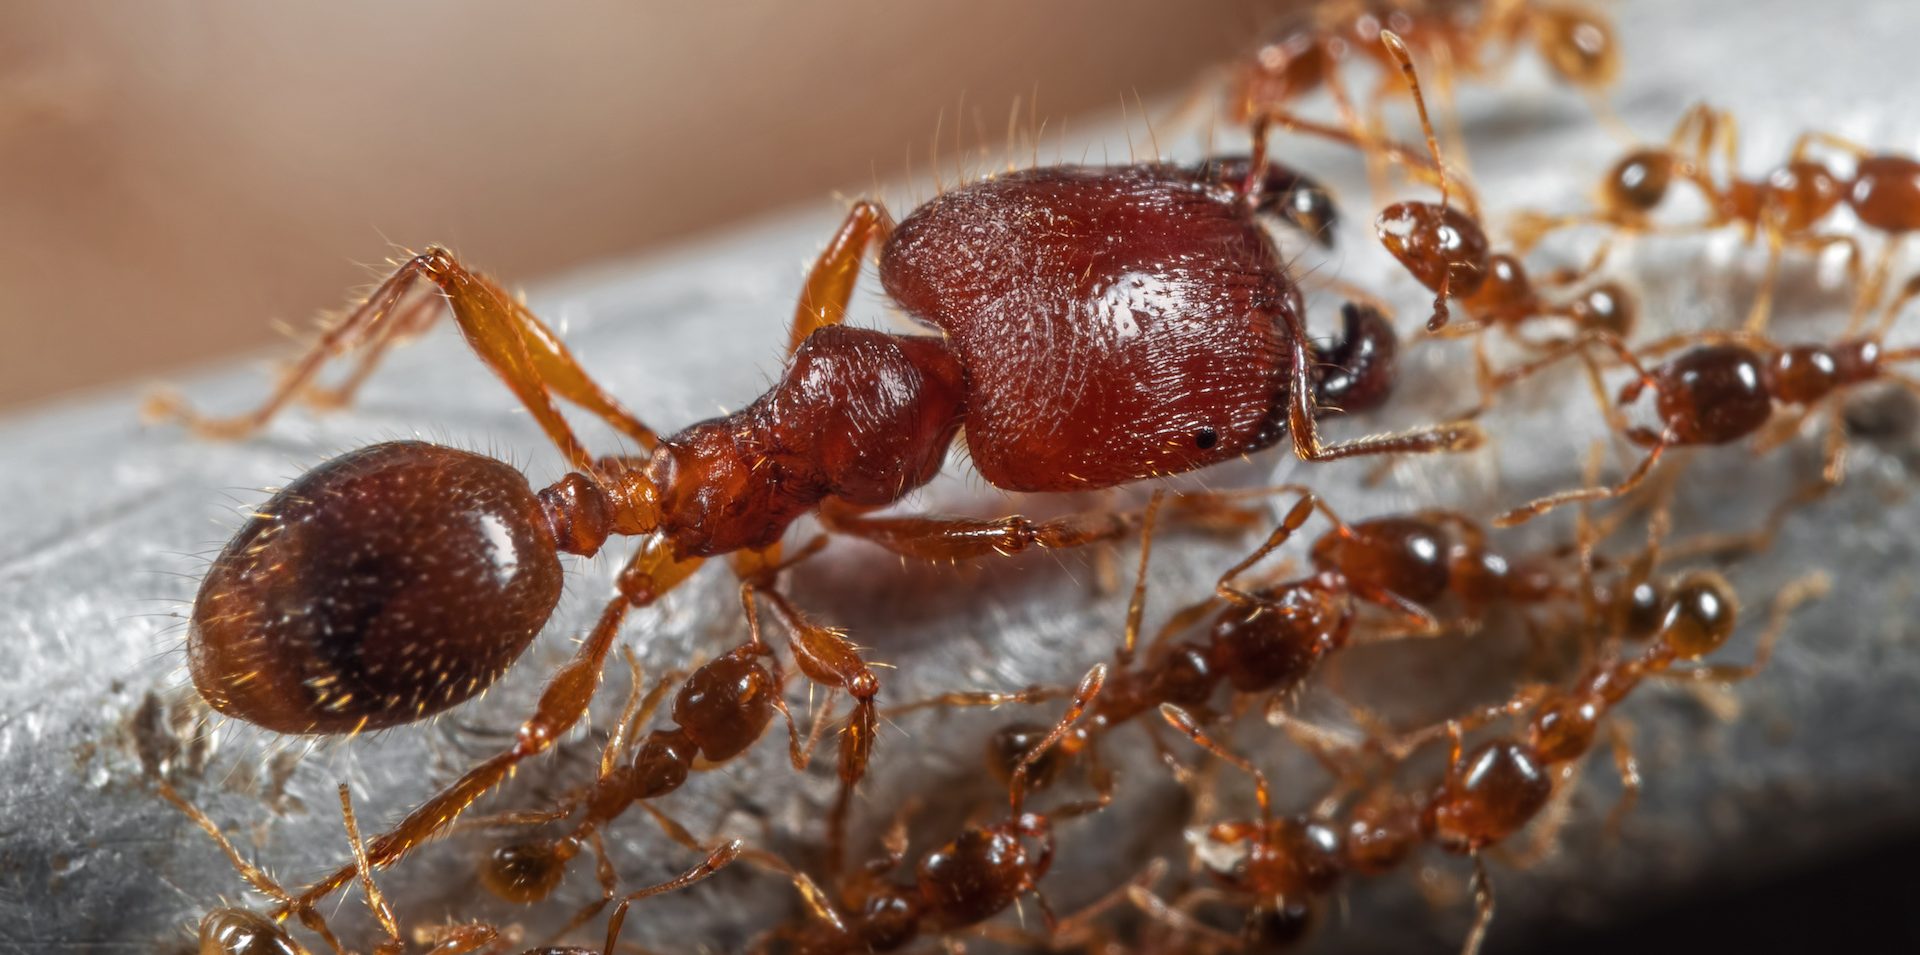 Invasive Big-Headed Ants Pose a Major Threat to a Kenyan Ecosystem